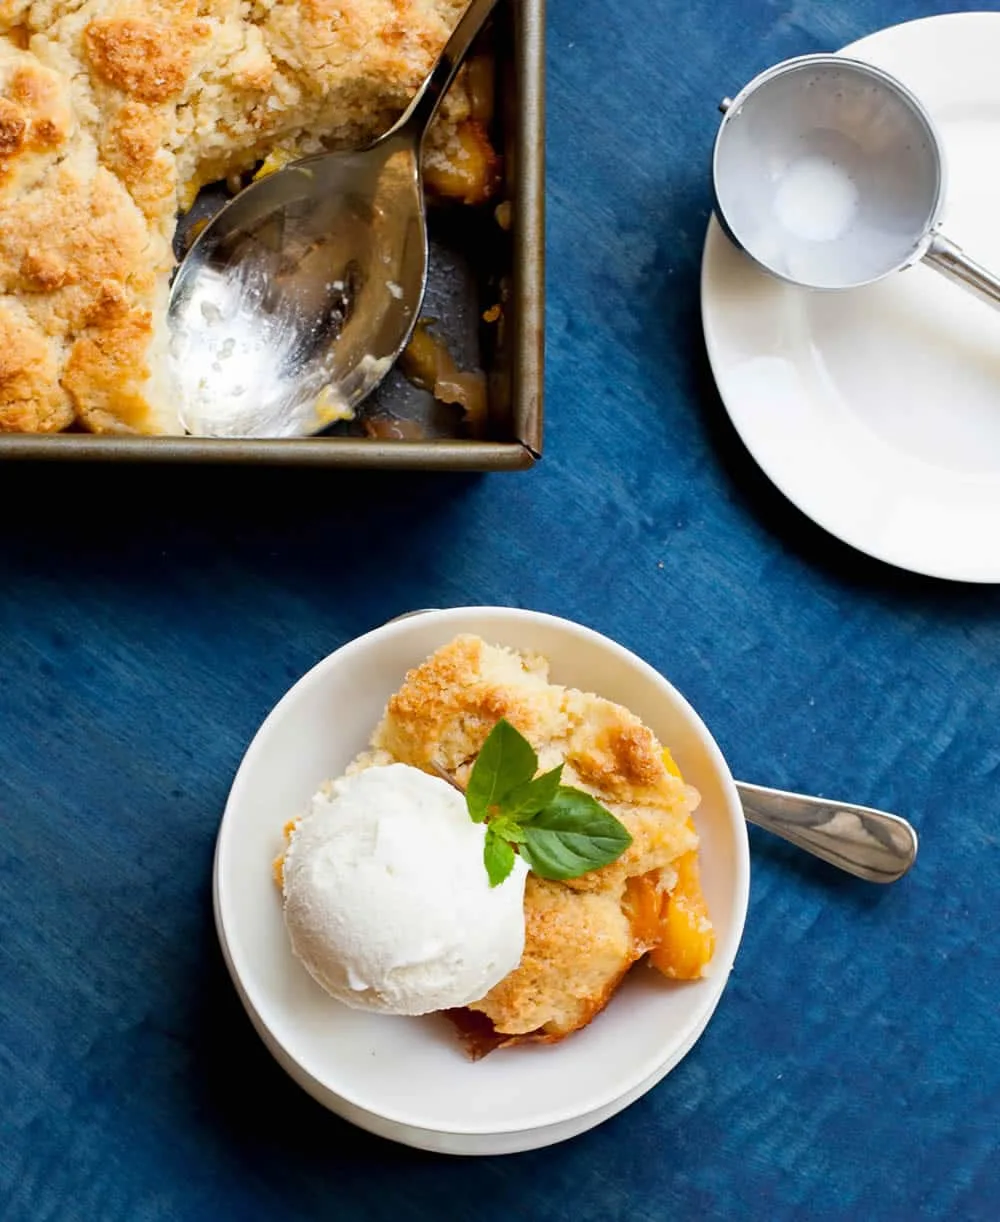 Georgia Peach Cobbler. Fresh peaches, lightly spiced and sweetened with two kinds of sugar, are baked under a delicious sweet biscuit topping!